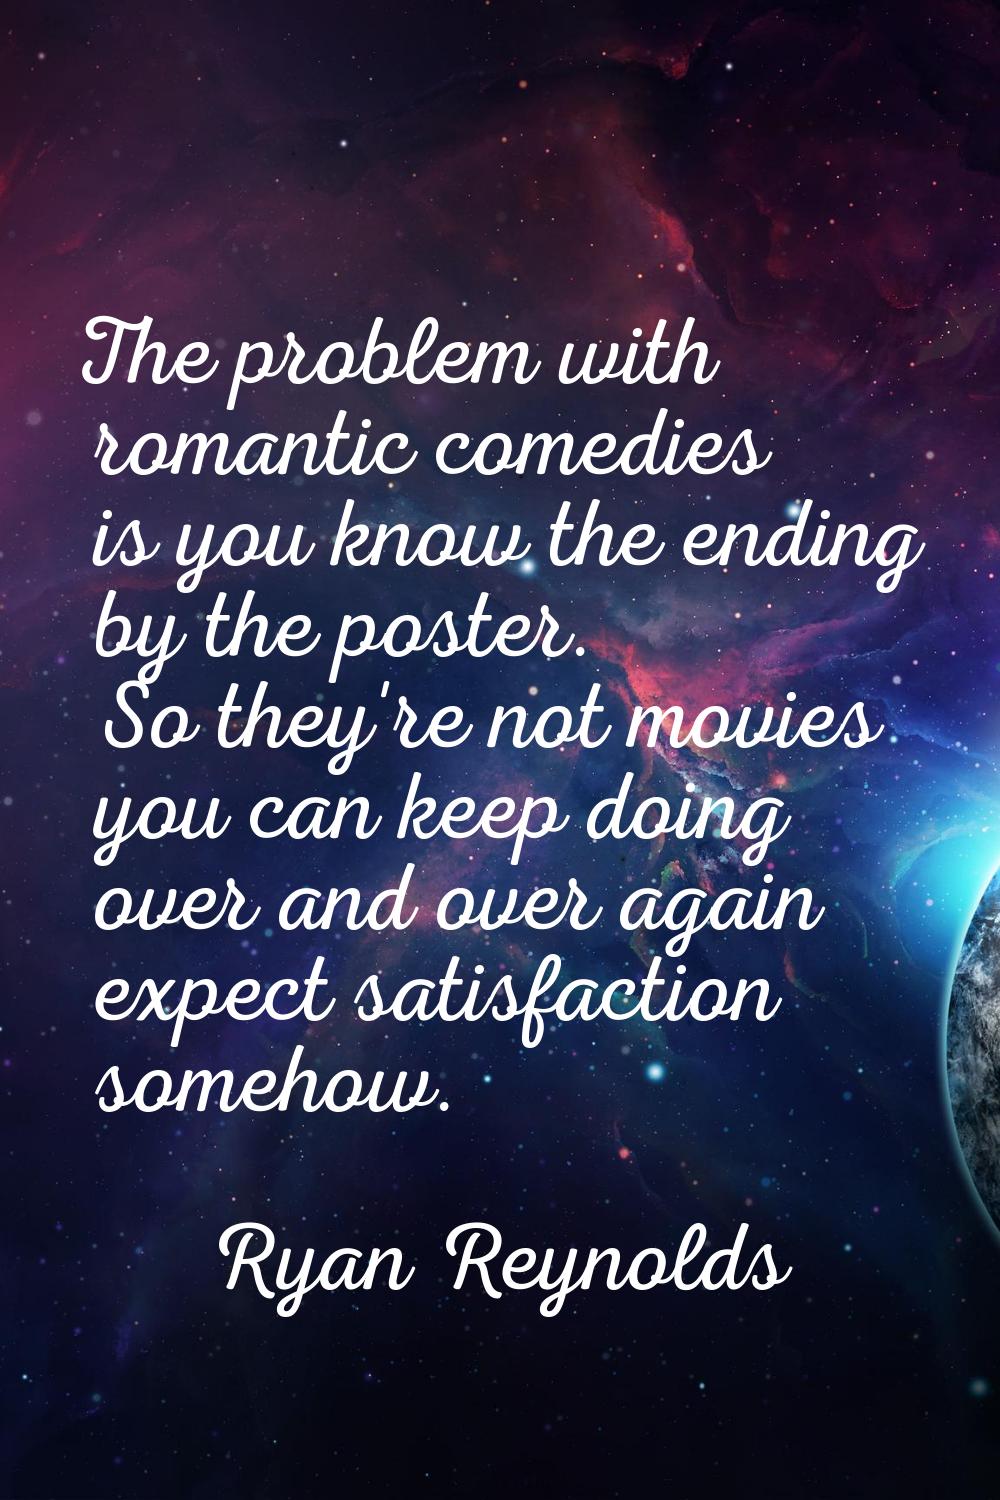 The problem with romantic comedies is you know the ending by the poster. So they're not movies you 